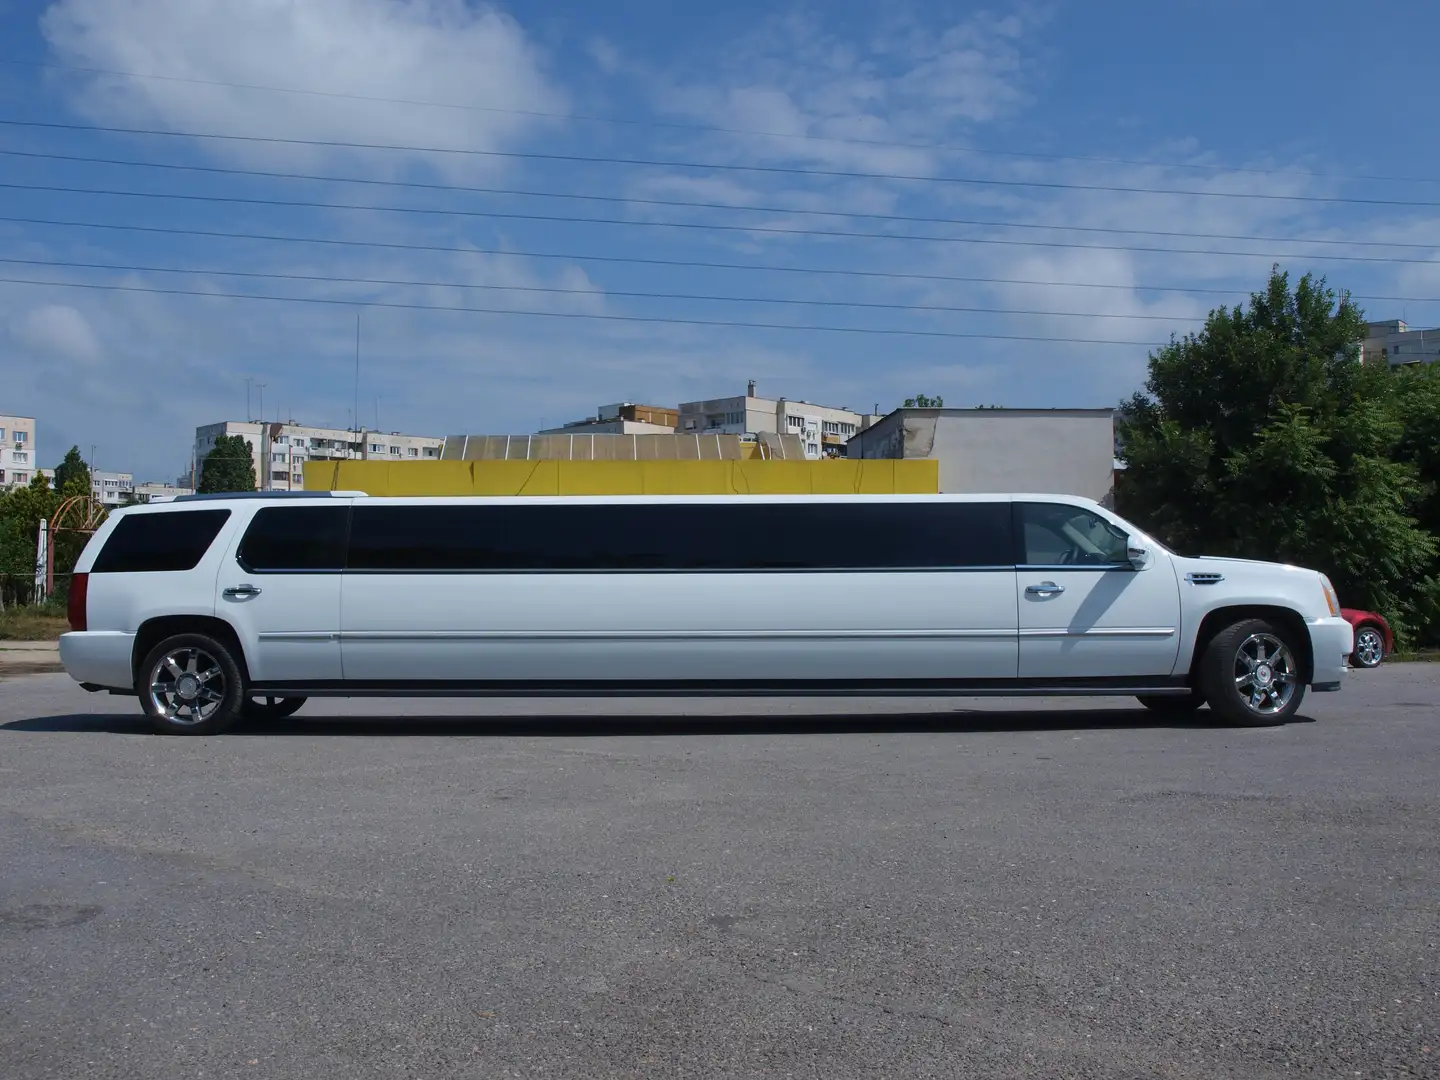 Cadillac Escalade 203-inch Stretch Limousine by Moonlight Industries Blanc - 2